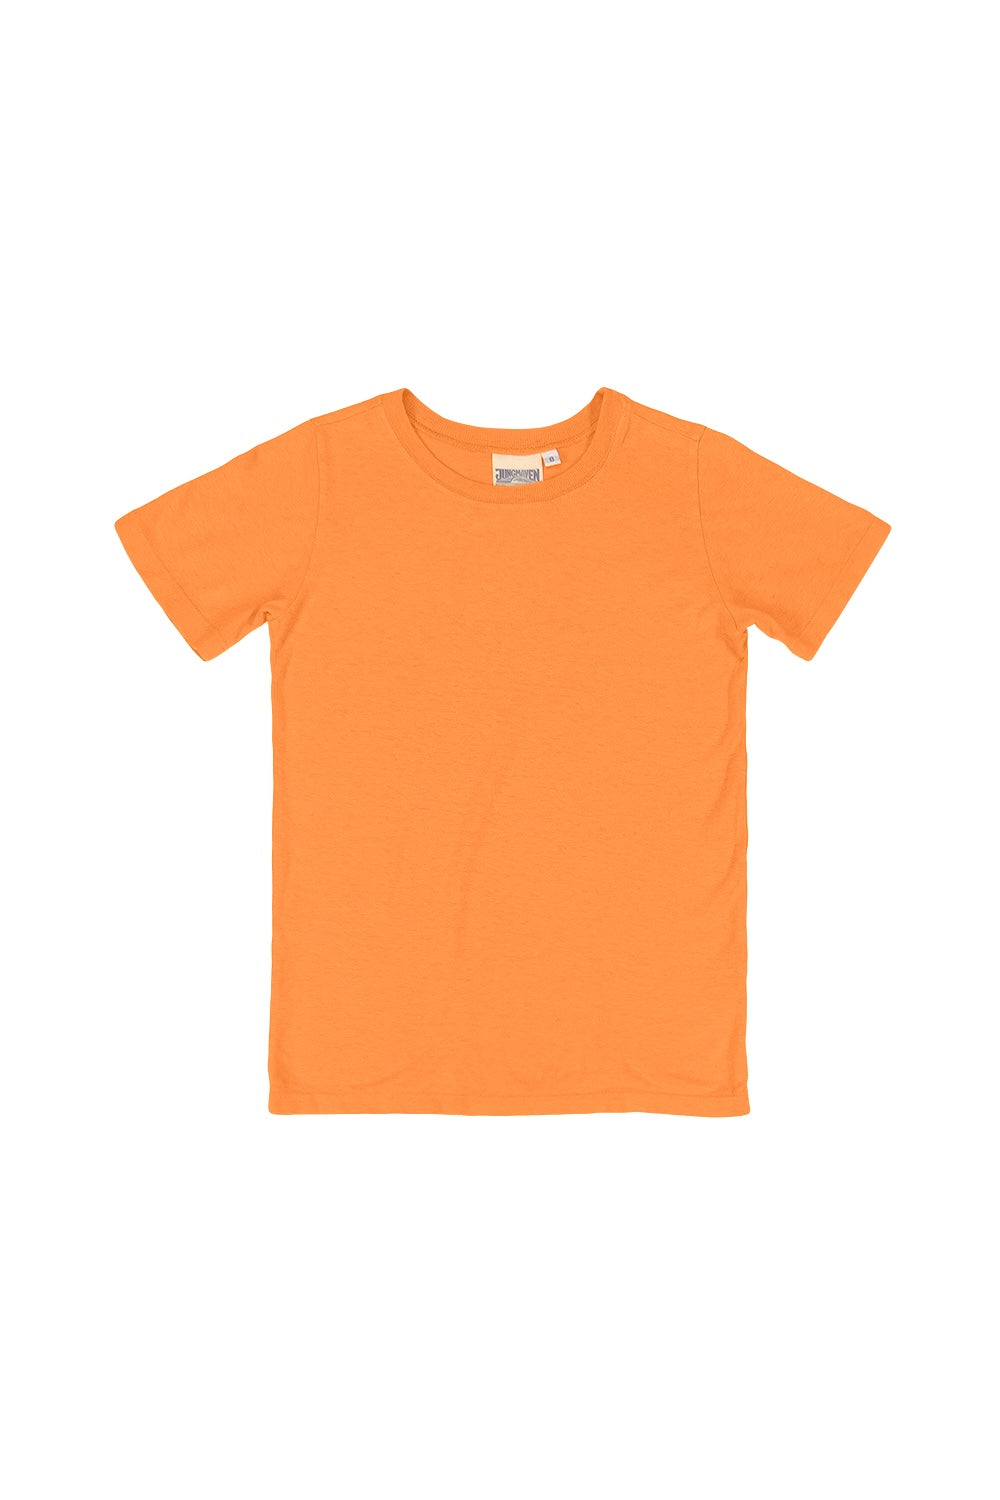 Grom Tee | Jungmaven Hemp Clothing & Accessories / Color: Apricot Crush